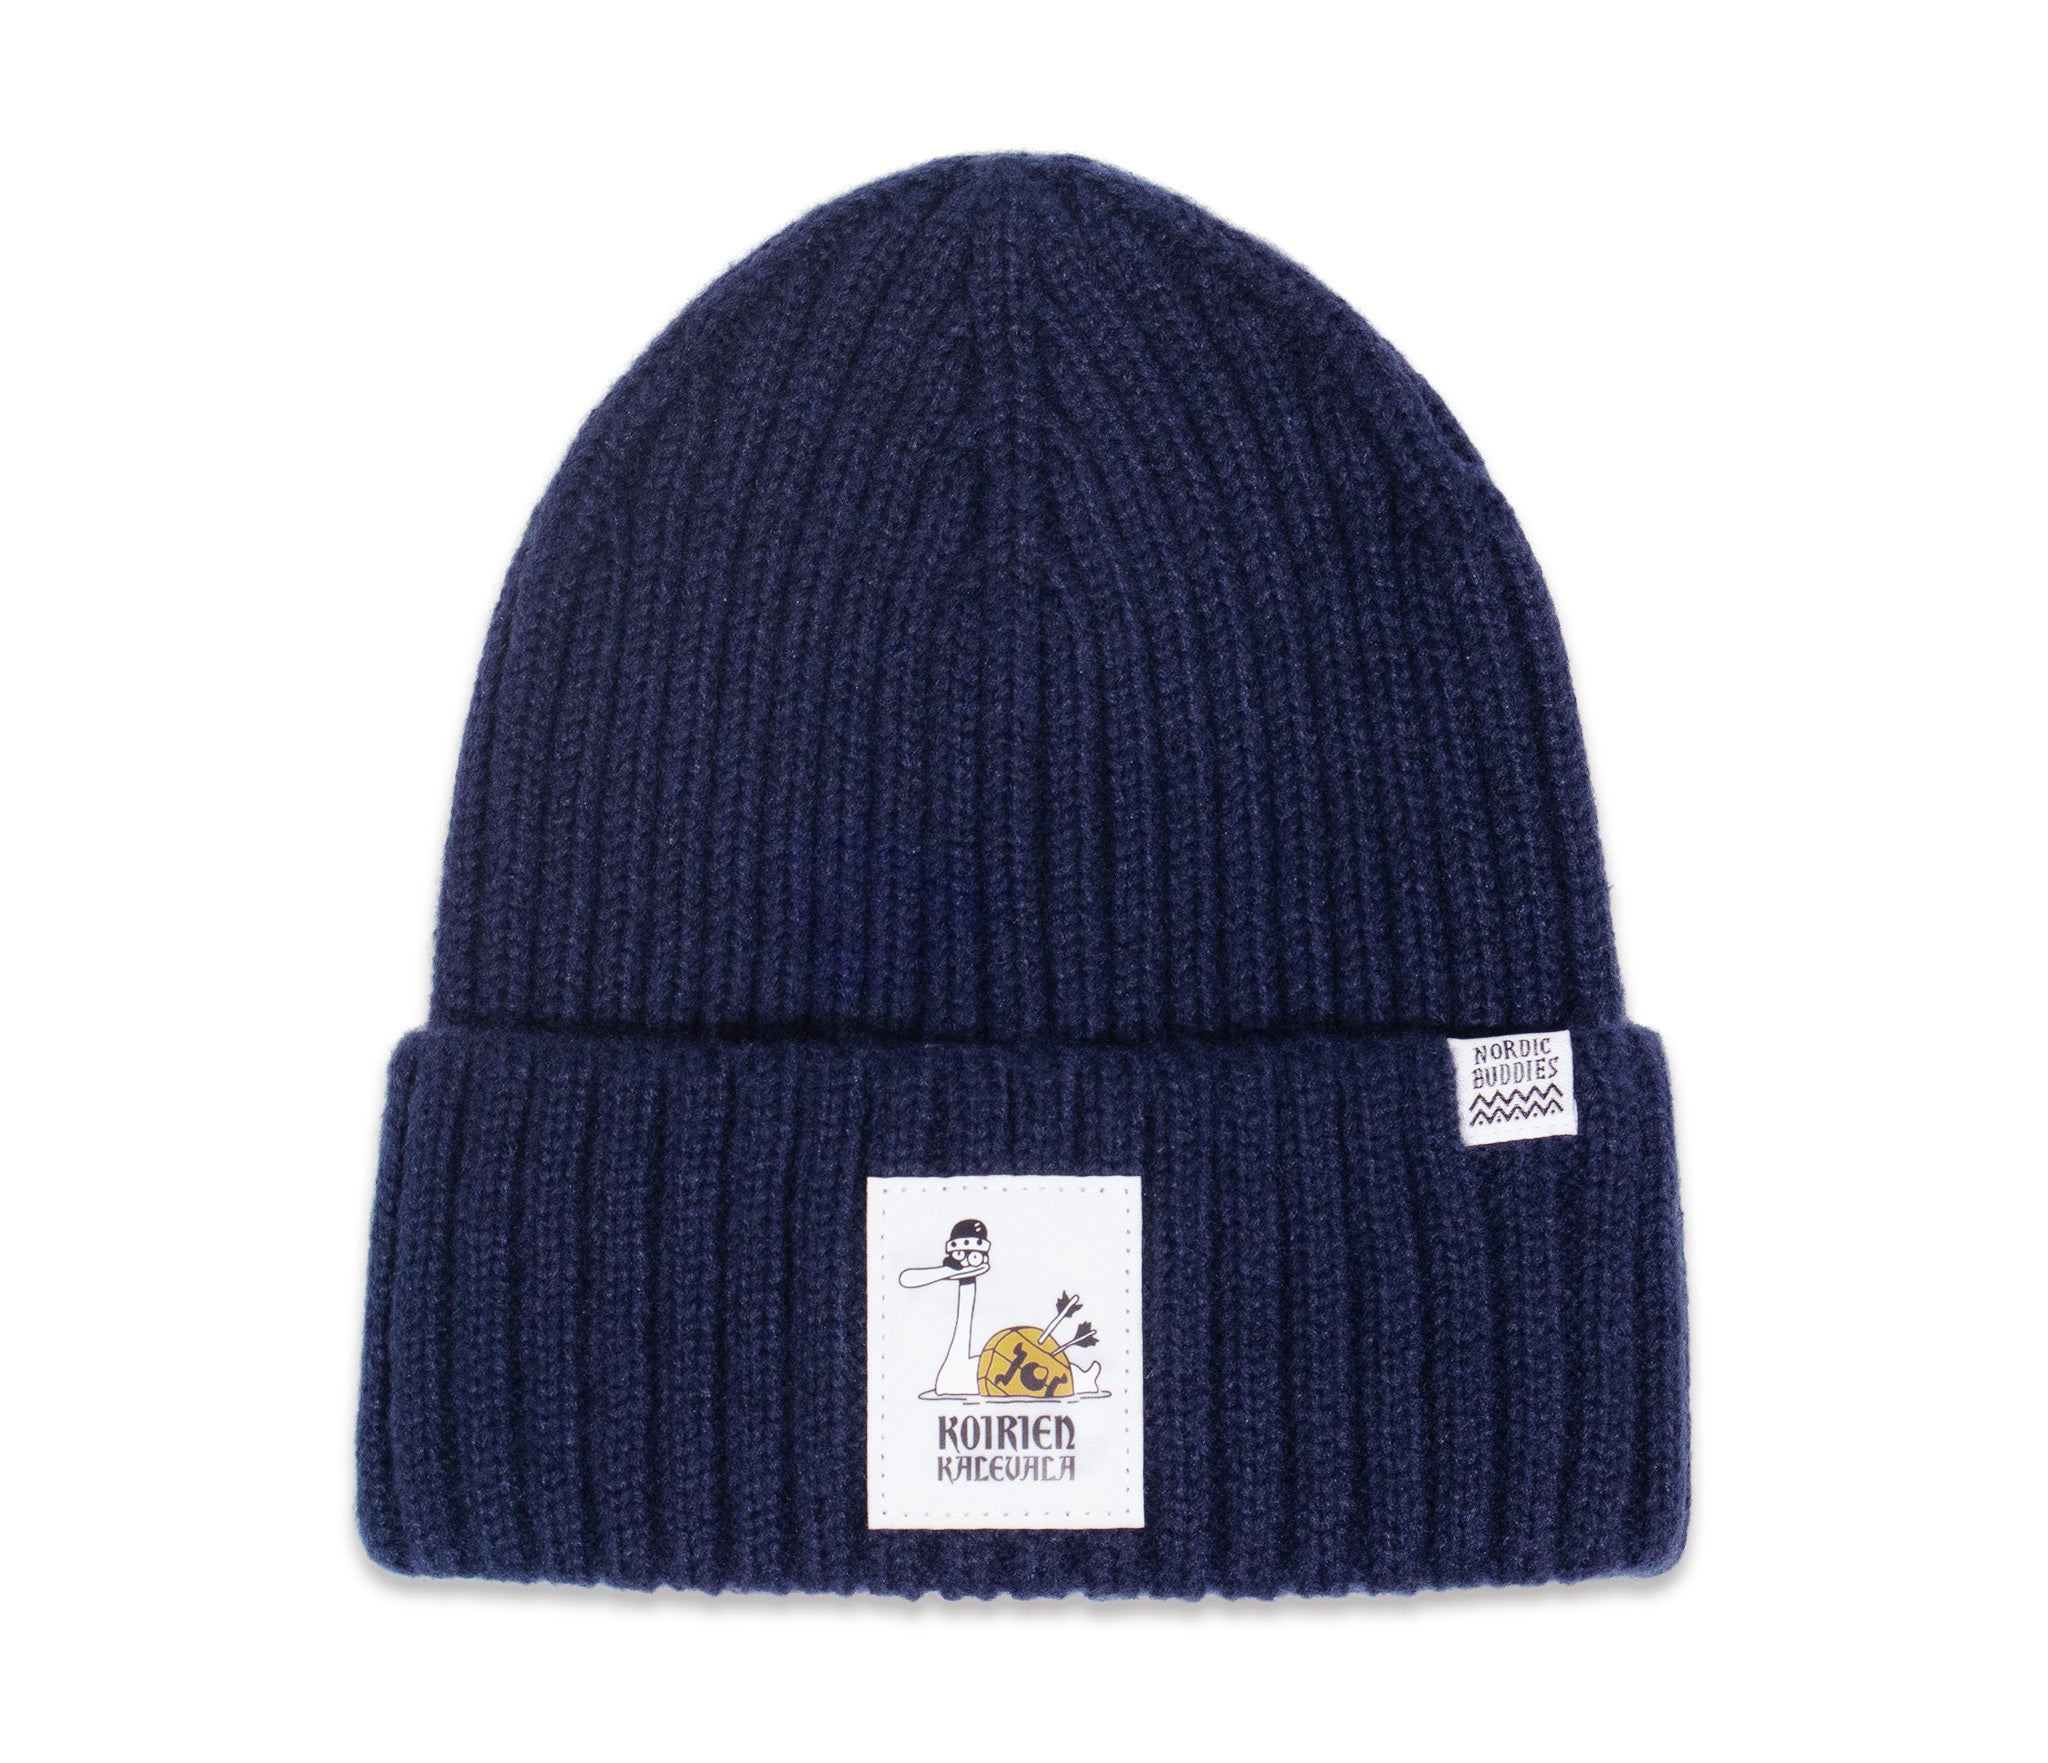 The Canine Kalevala Winter Hat Beanie Adult - Navy